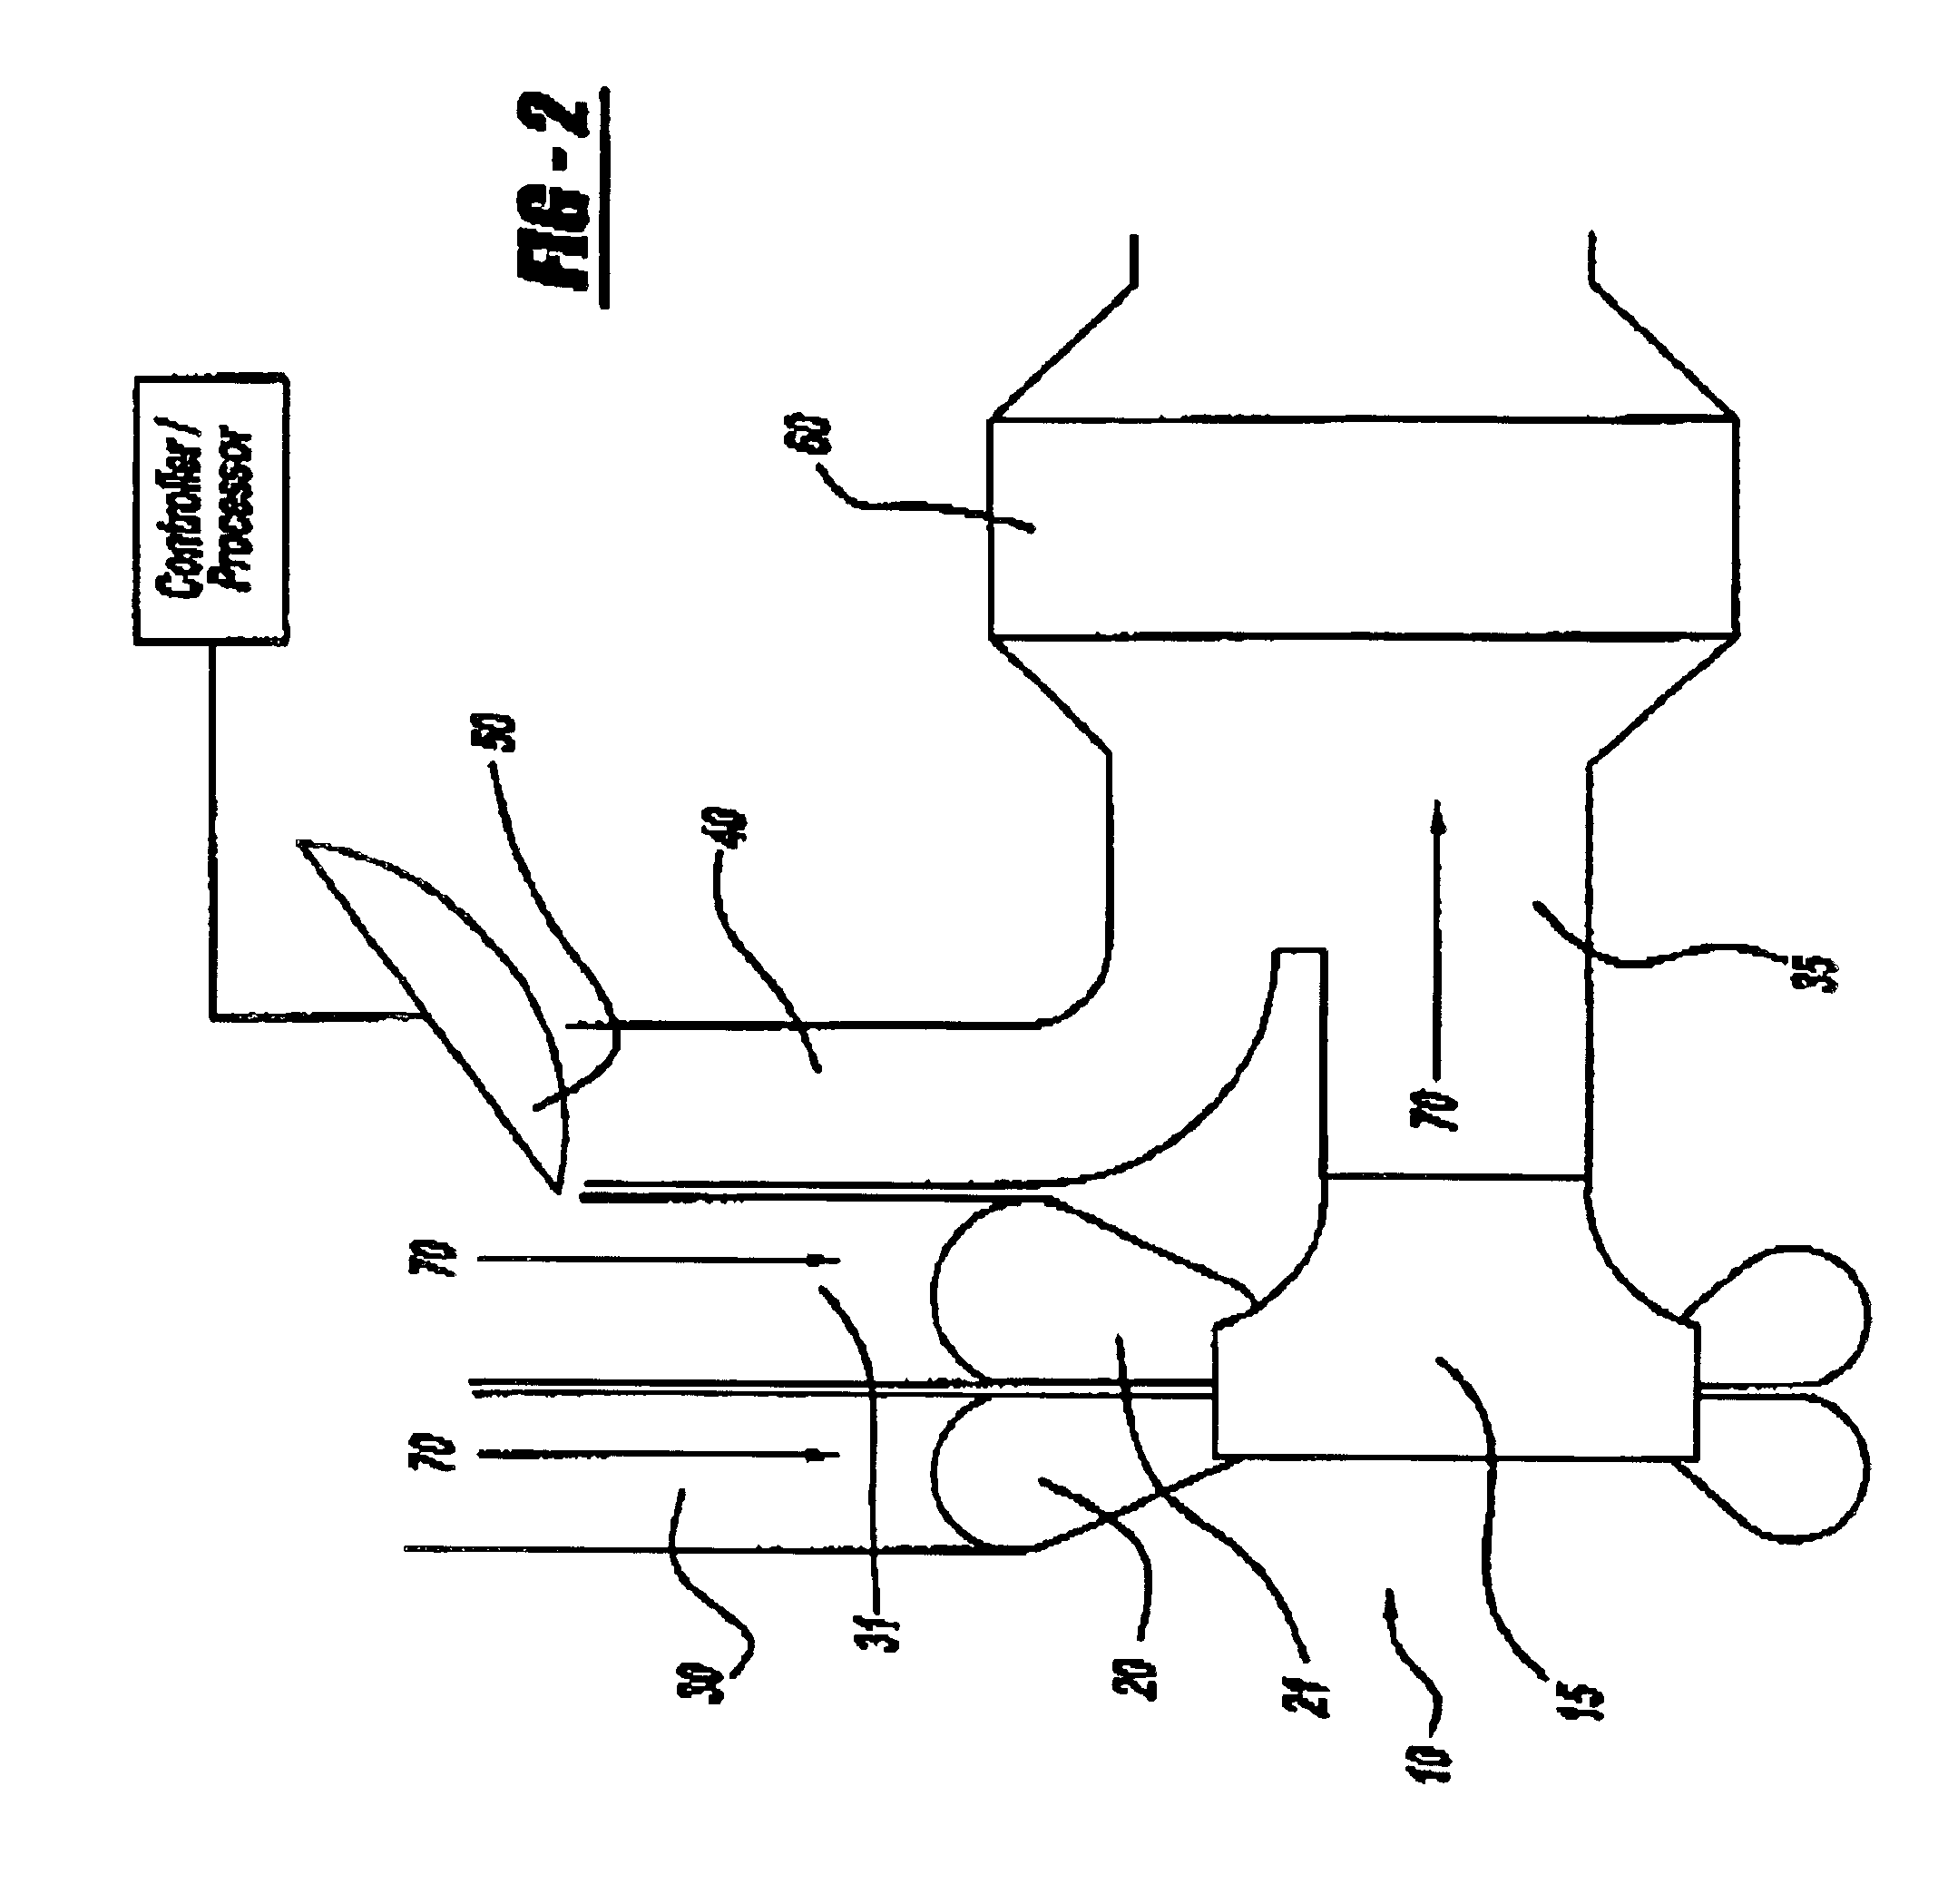 Integrated bypass and variable geometry configuration for an exhaust gas turbocharger